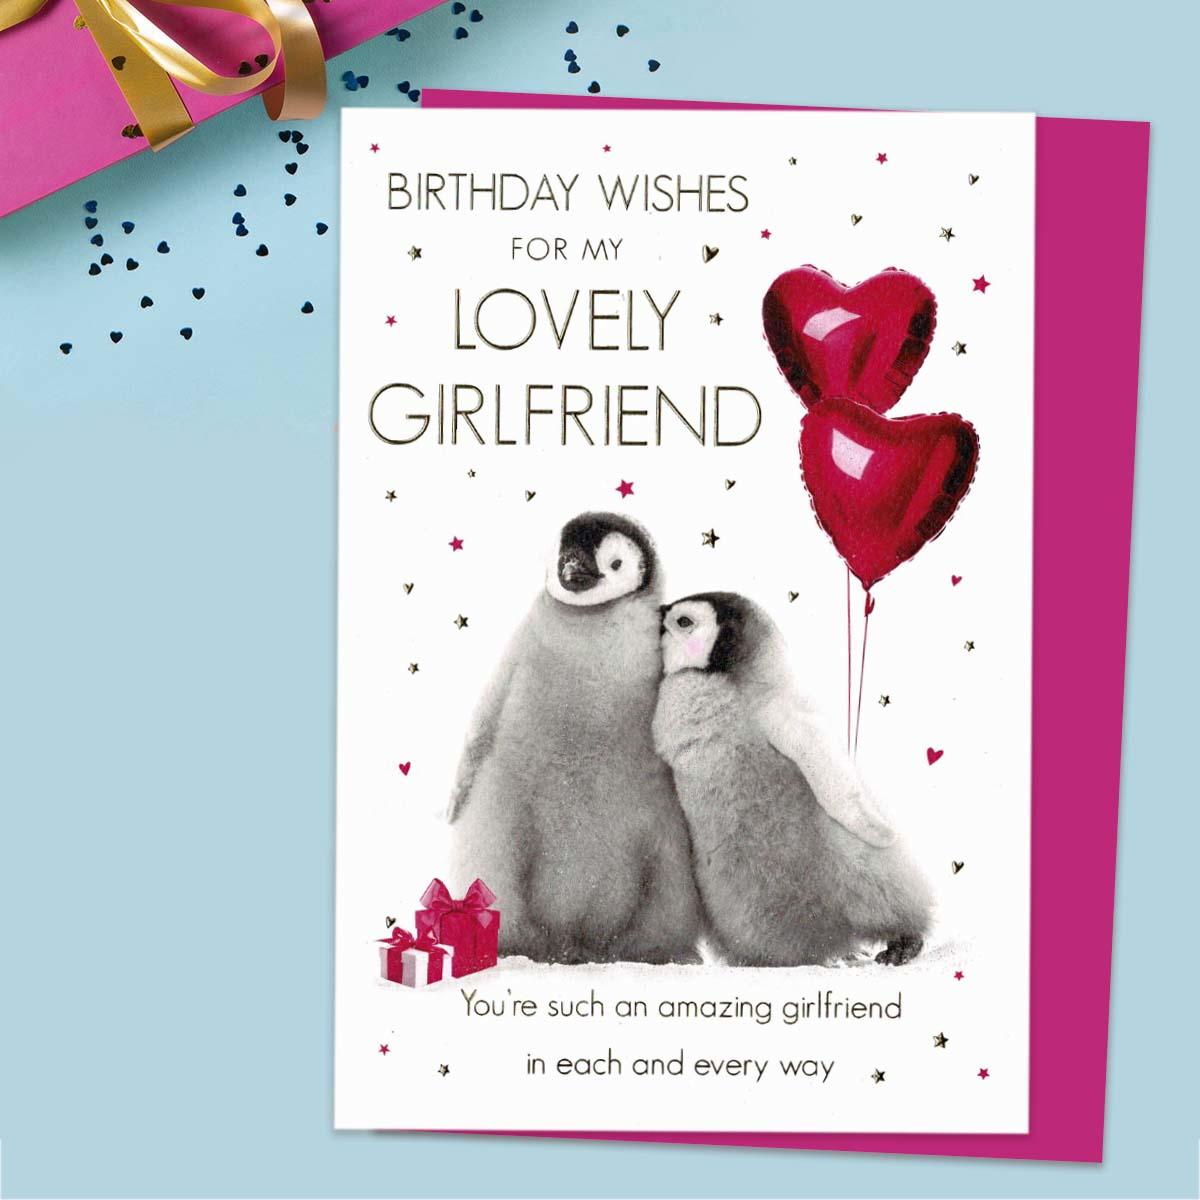 Lovely Girlfriend Snuggling Penguins Card Front Image